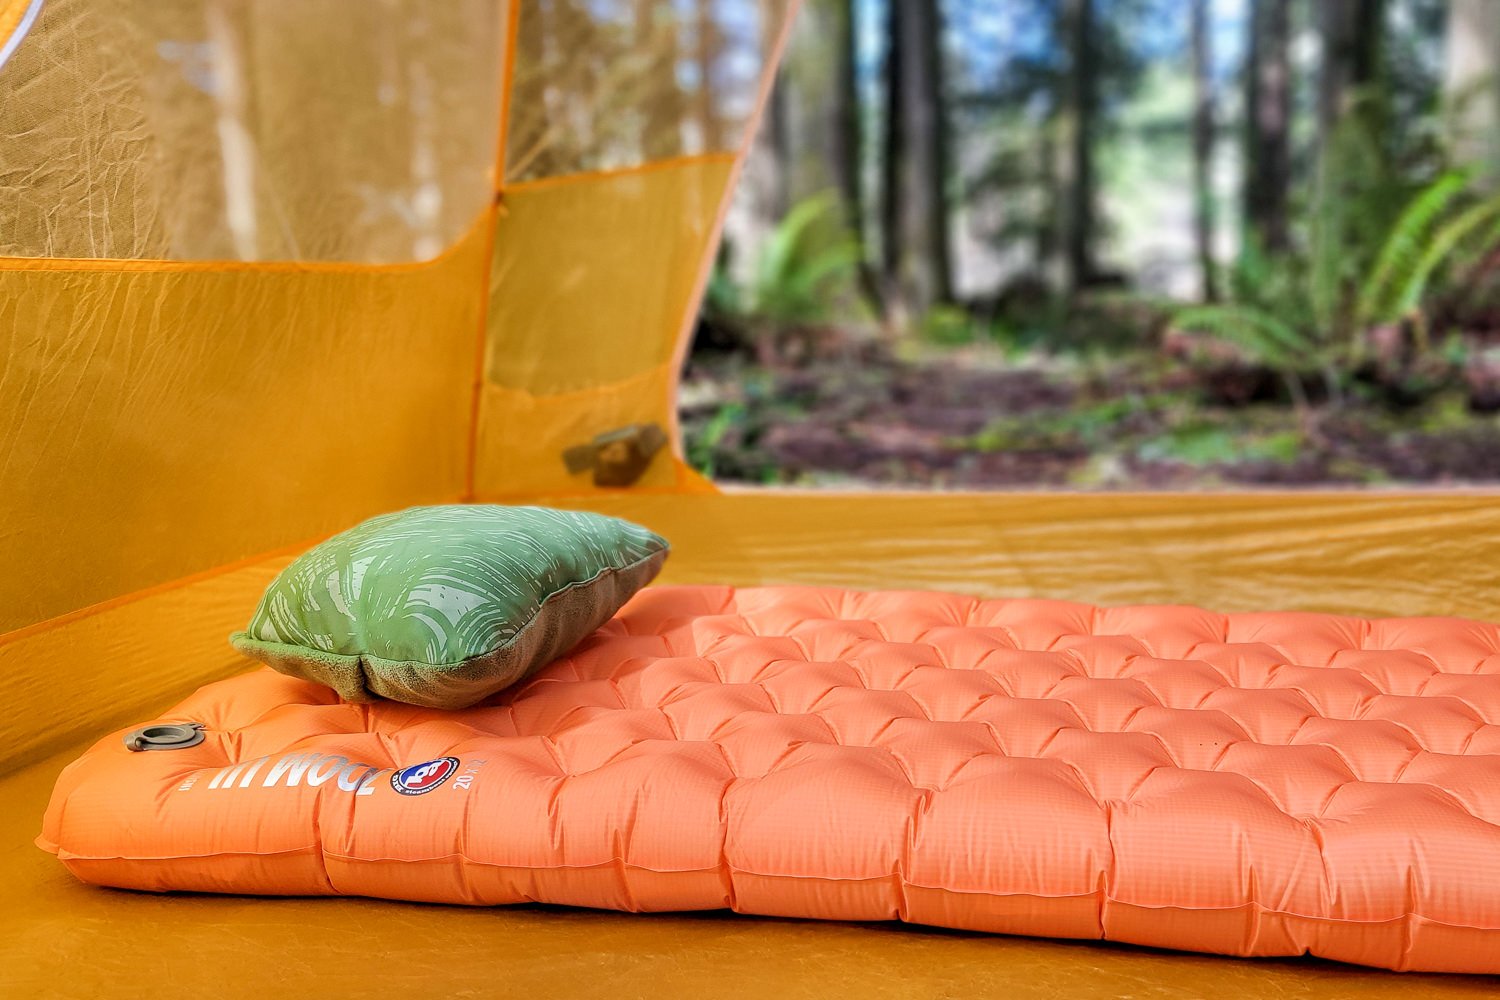 The Big Agnes Zoom UL sleeping pad in a tent with a pillow on top - the tent door is open and theres a forest in the background